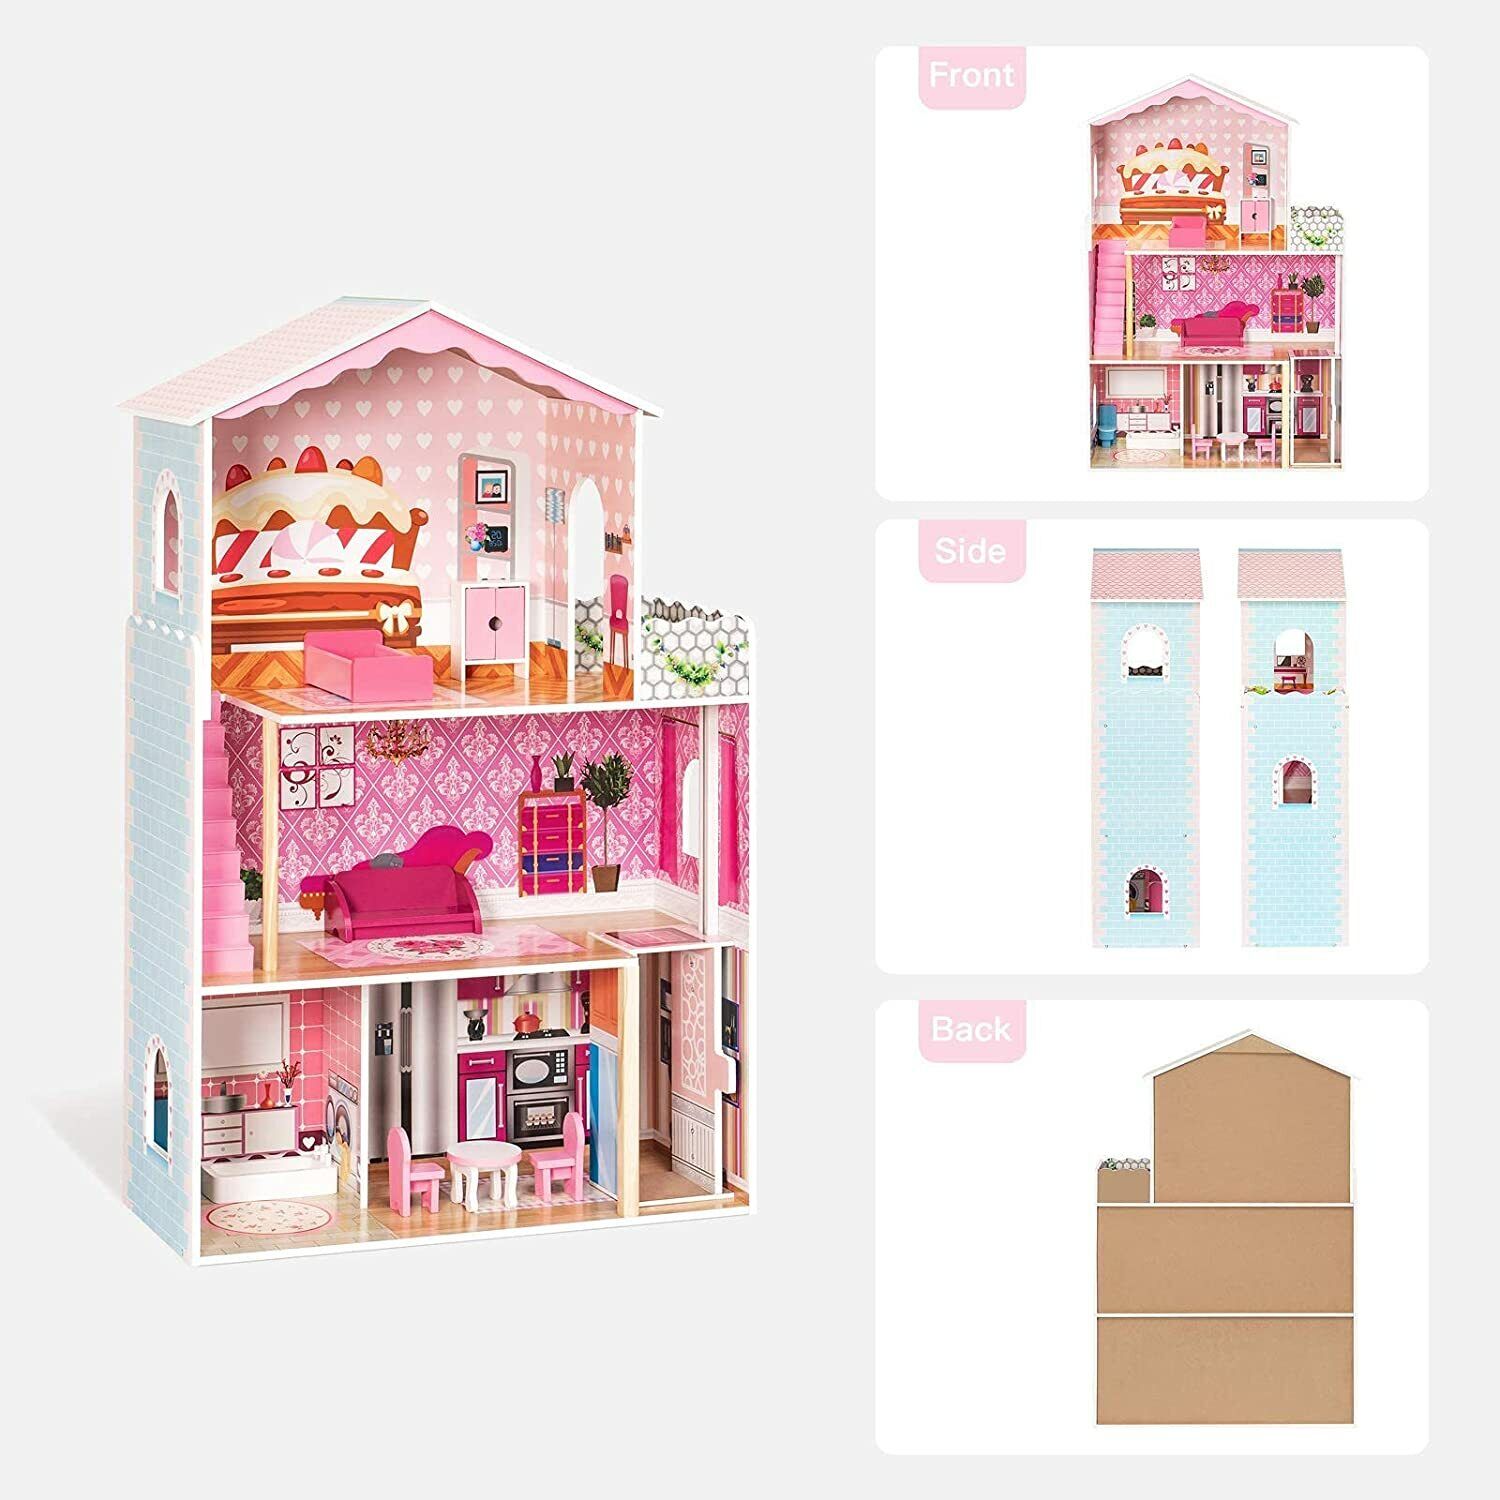 3 Level Girl DIY Wooden Pretend Play Doll House Kids Dollhouse Mansion 42''